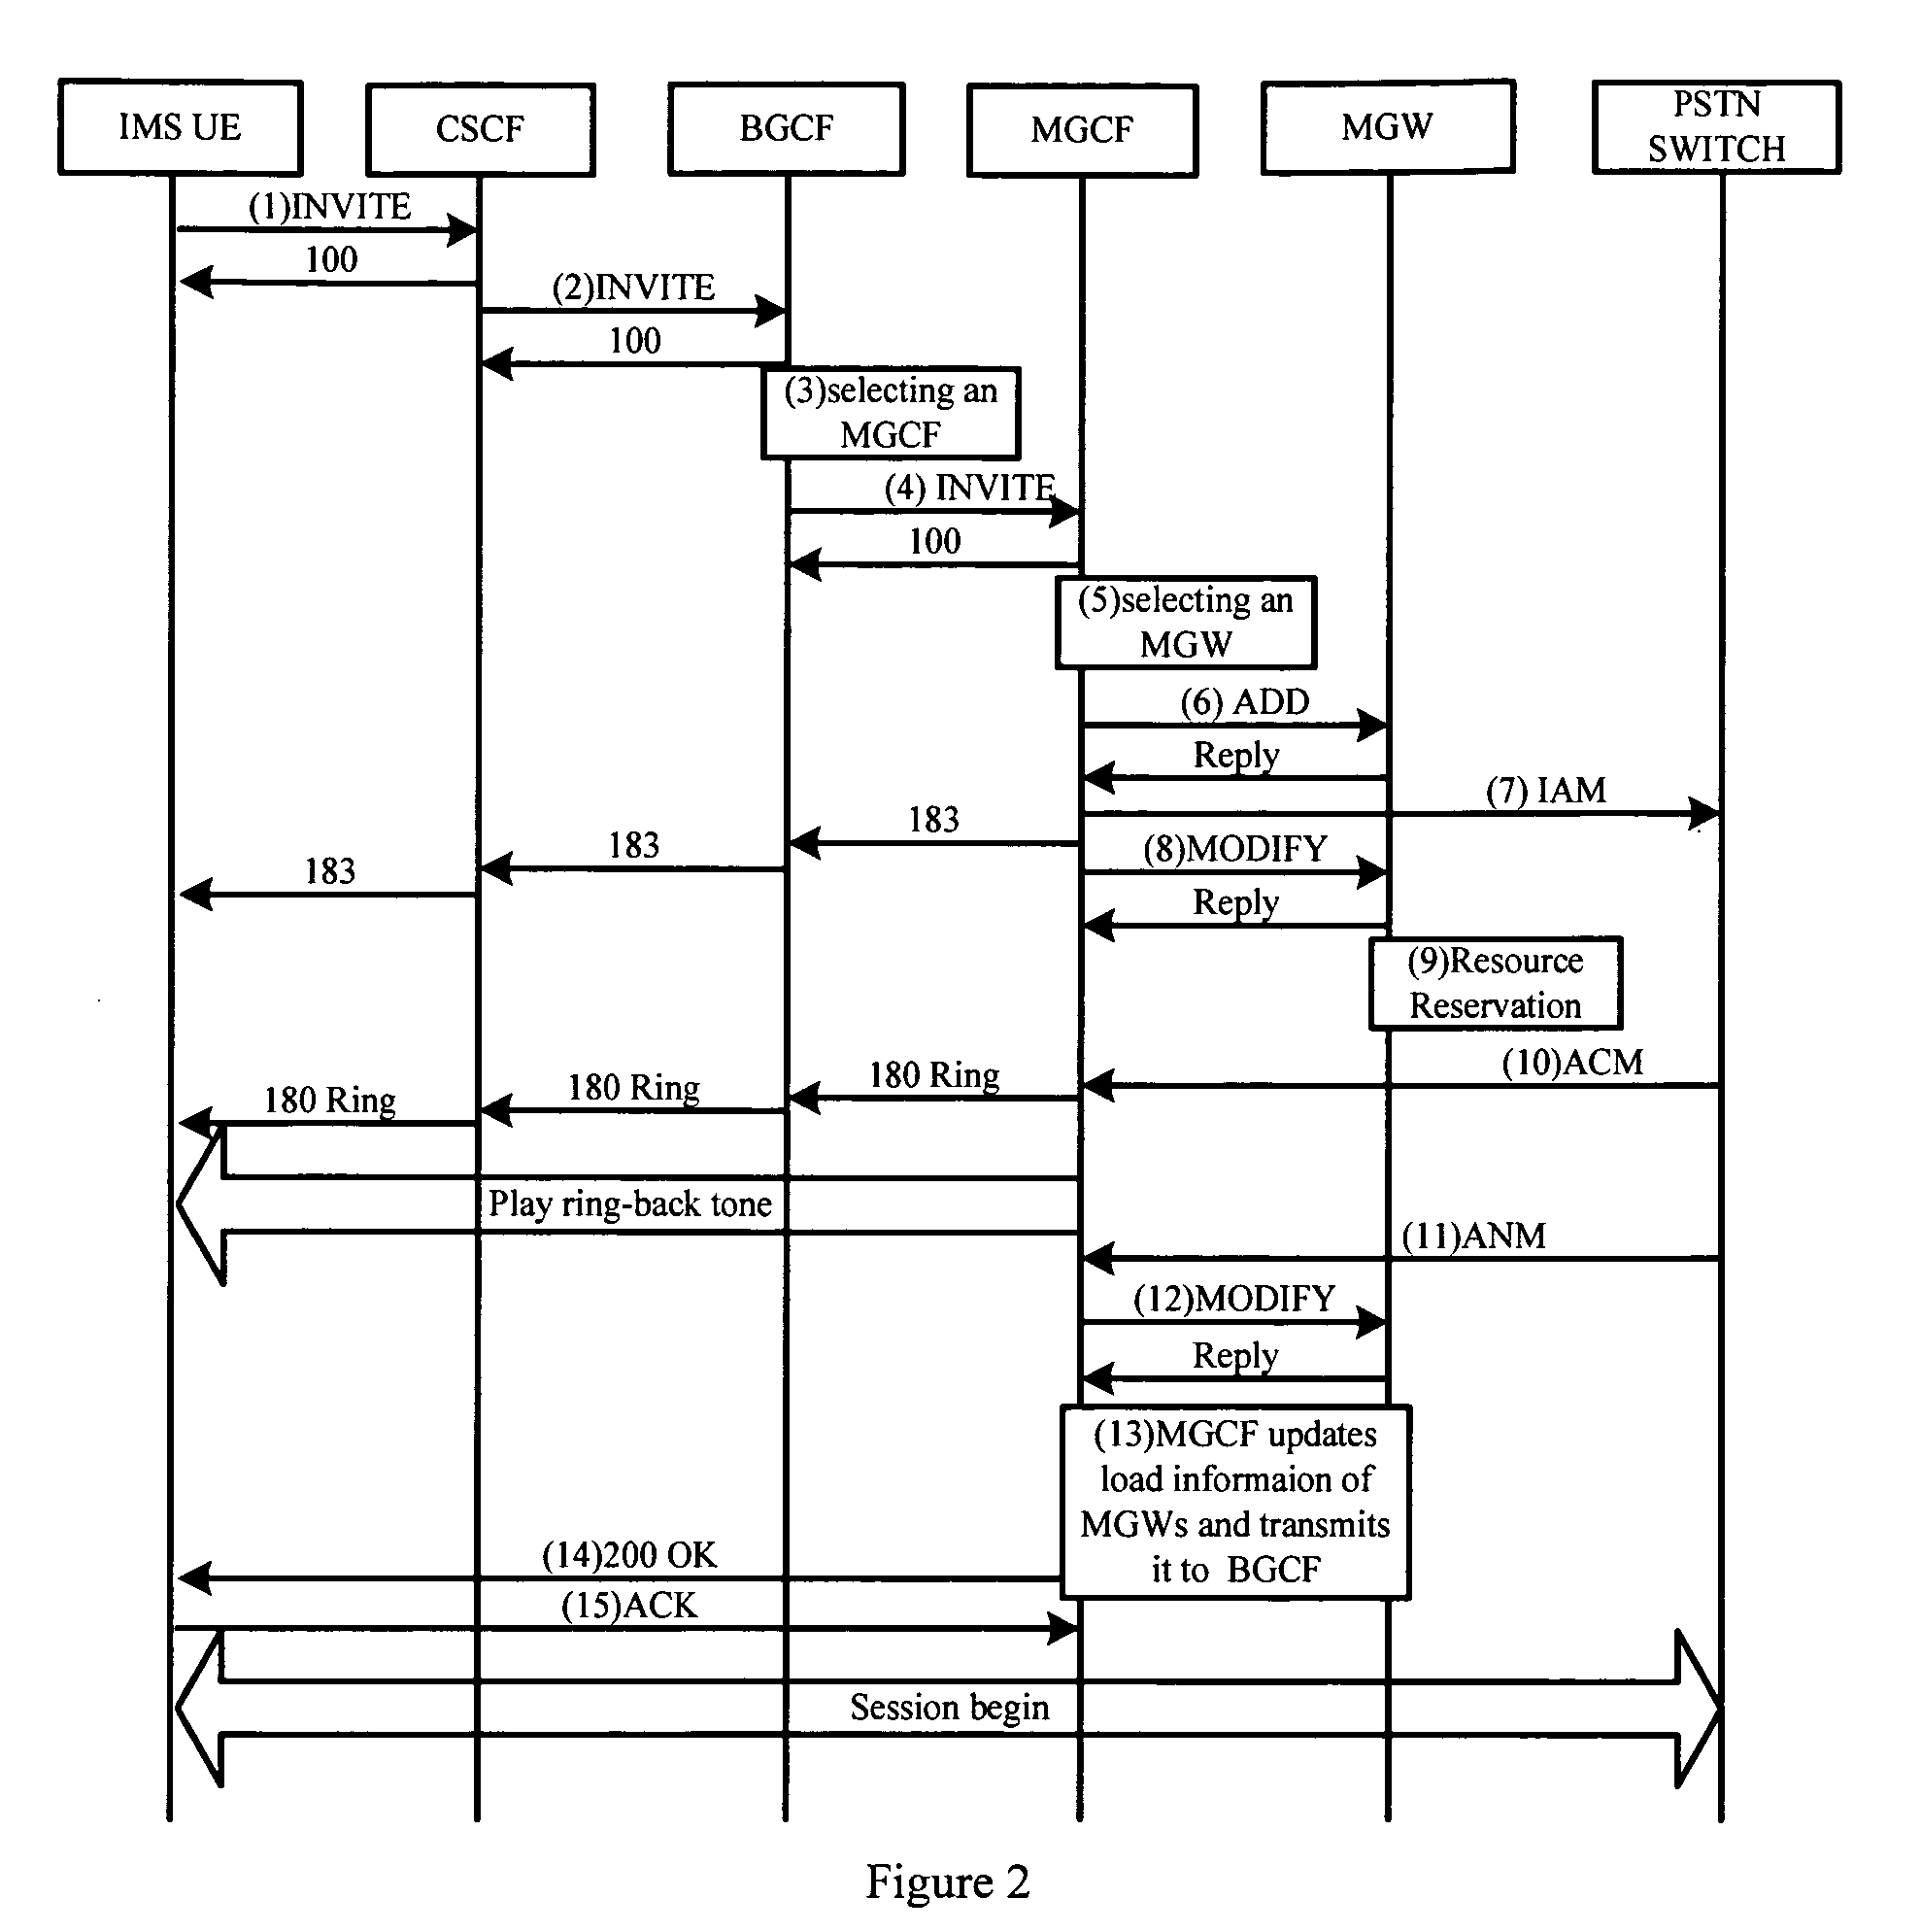 Method and means for route selection of a session